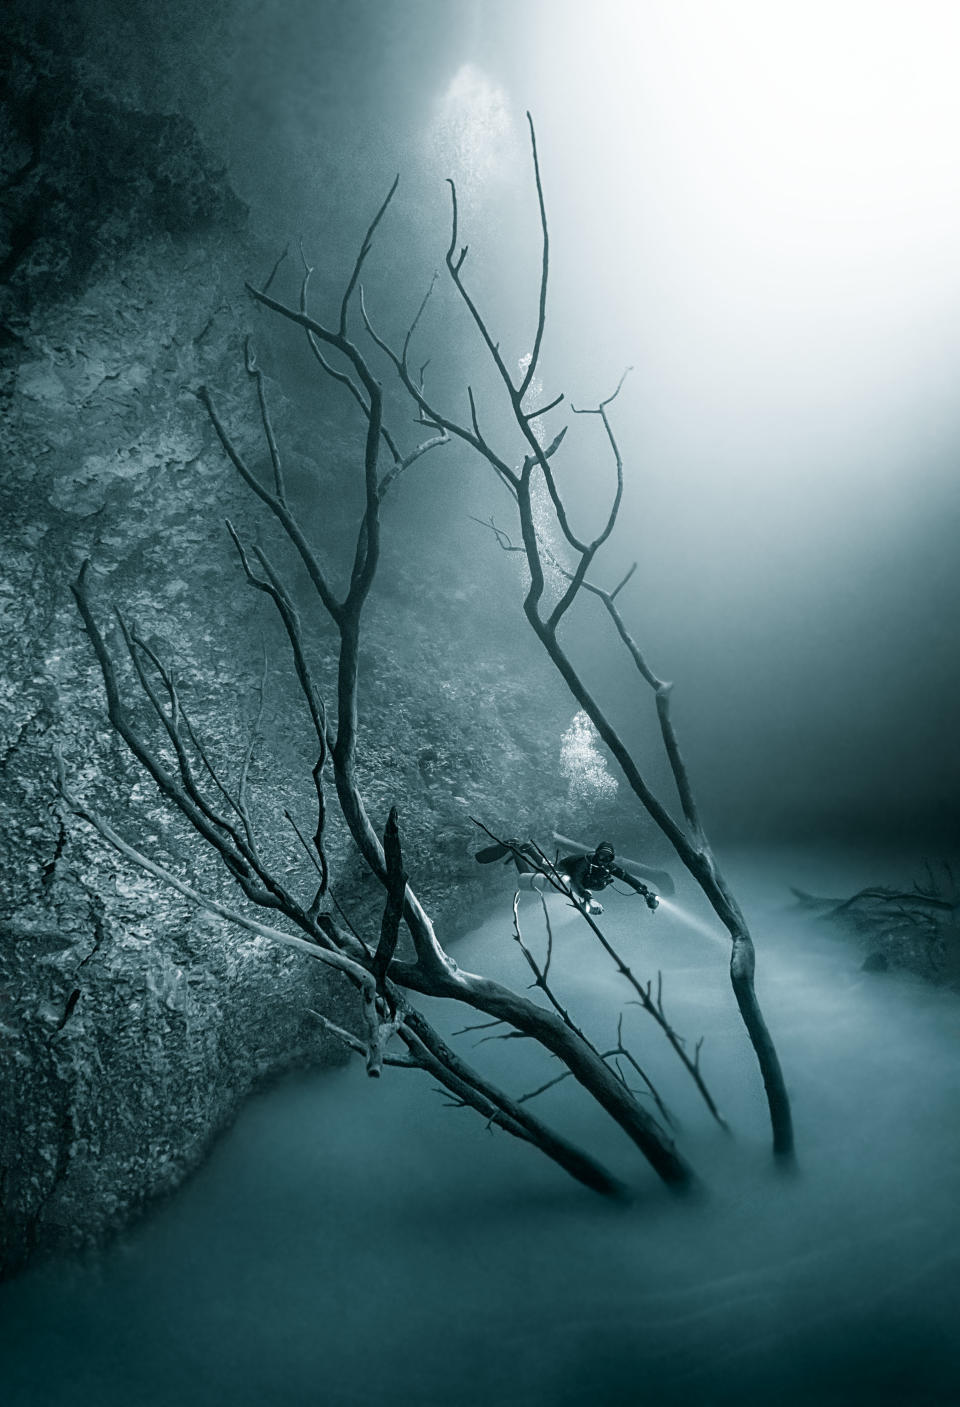  A hydrogen sulfide cloud in the Cenote Angelita. (Martin Broen/Caters News)